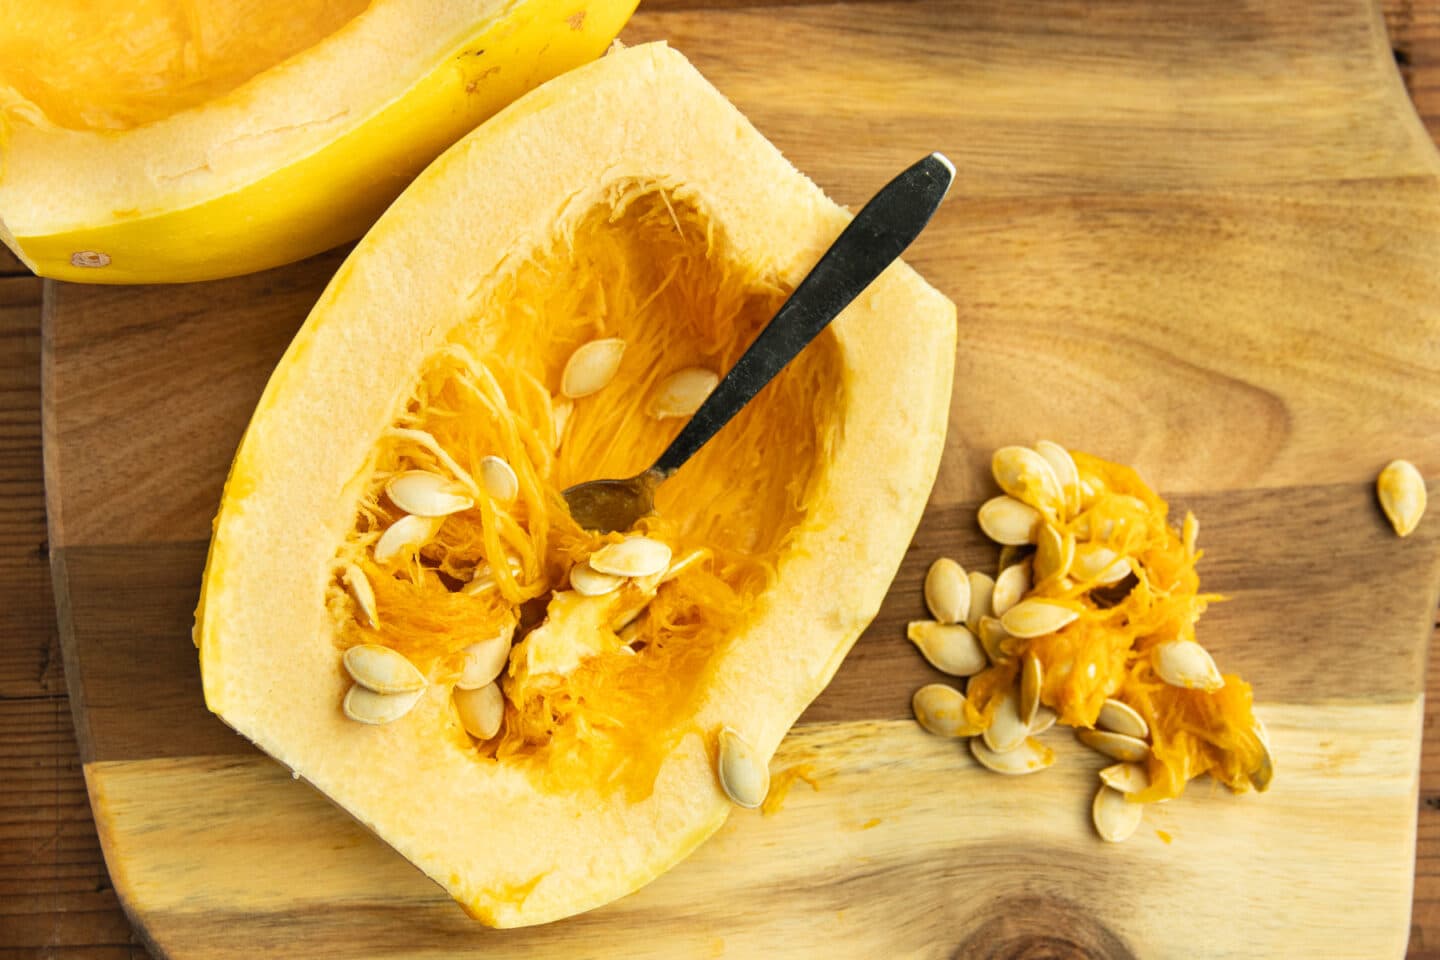 This is a picture of the seeds being removed from the inside of the squash.